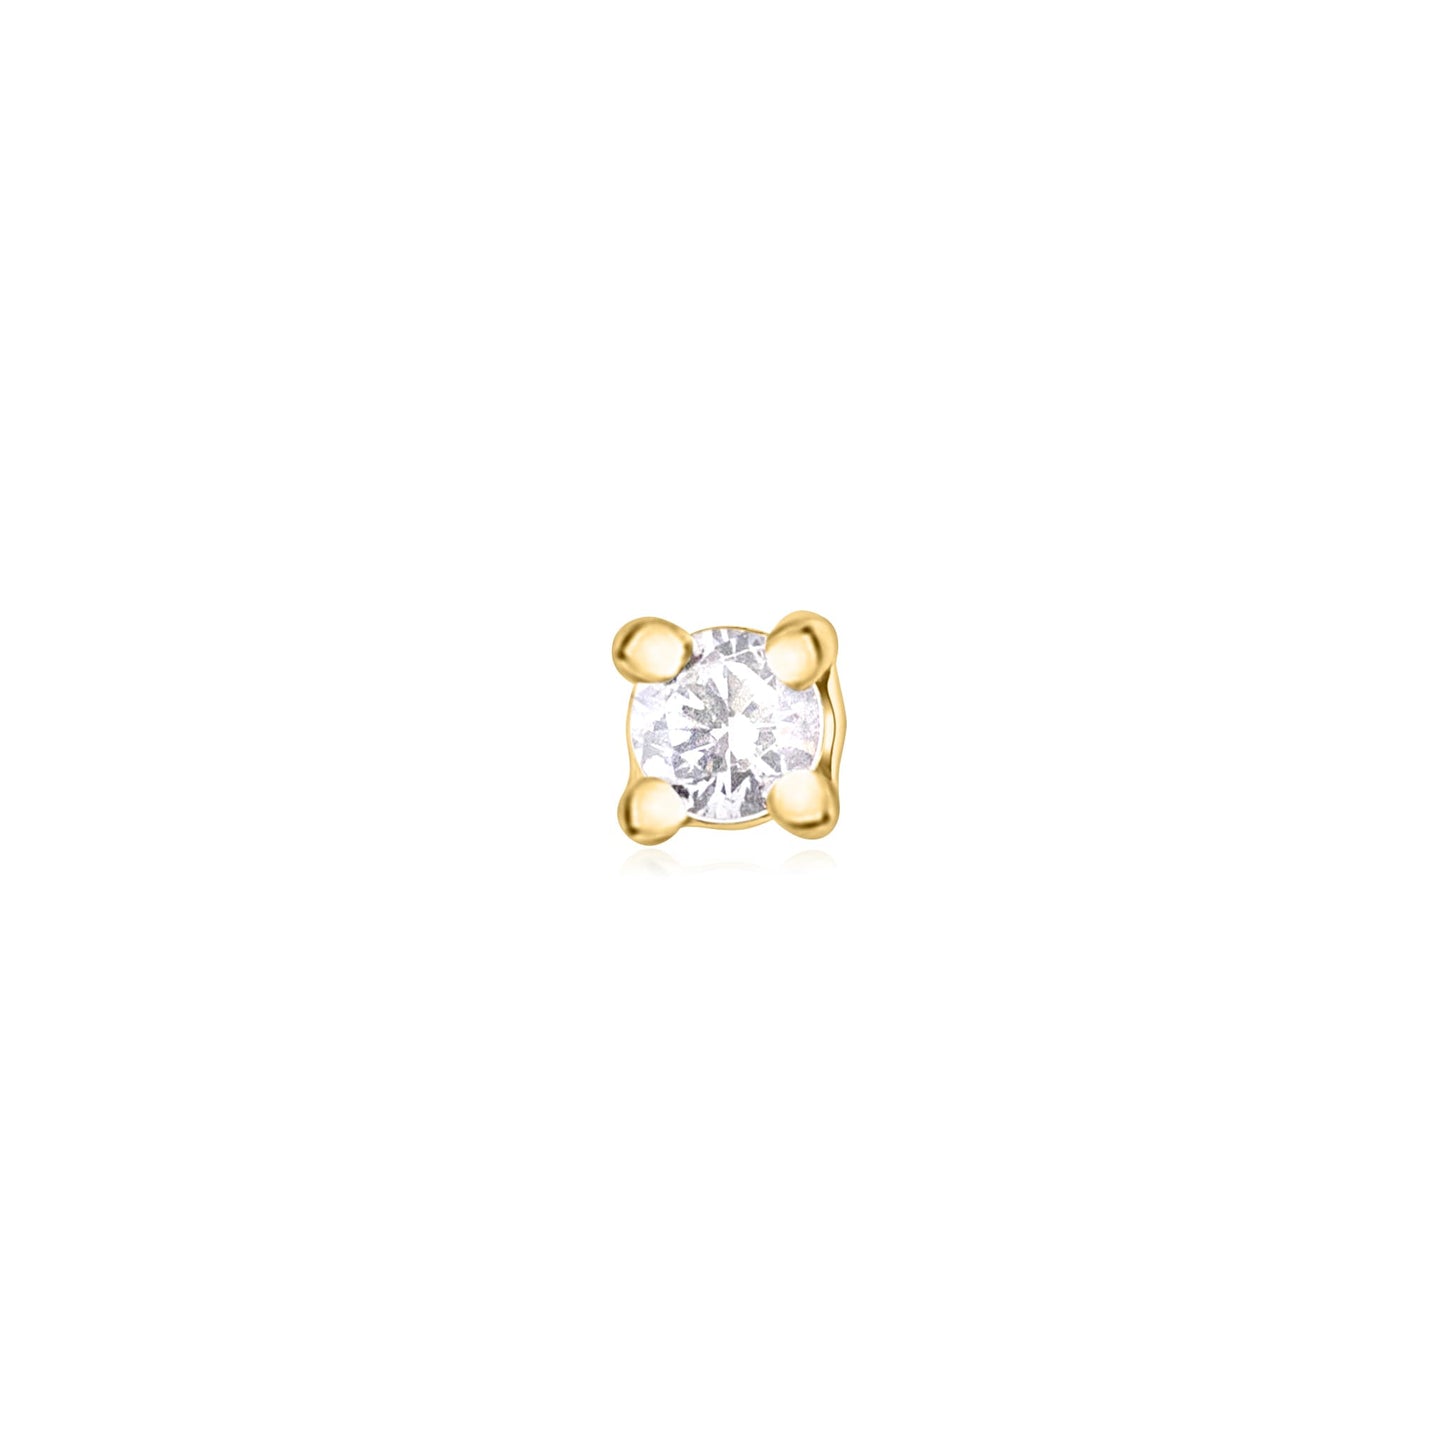 Frontal photo of the Gold Stud Earrings with Stone